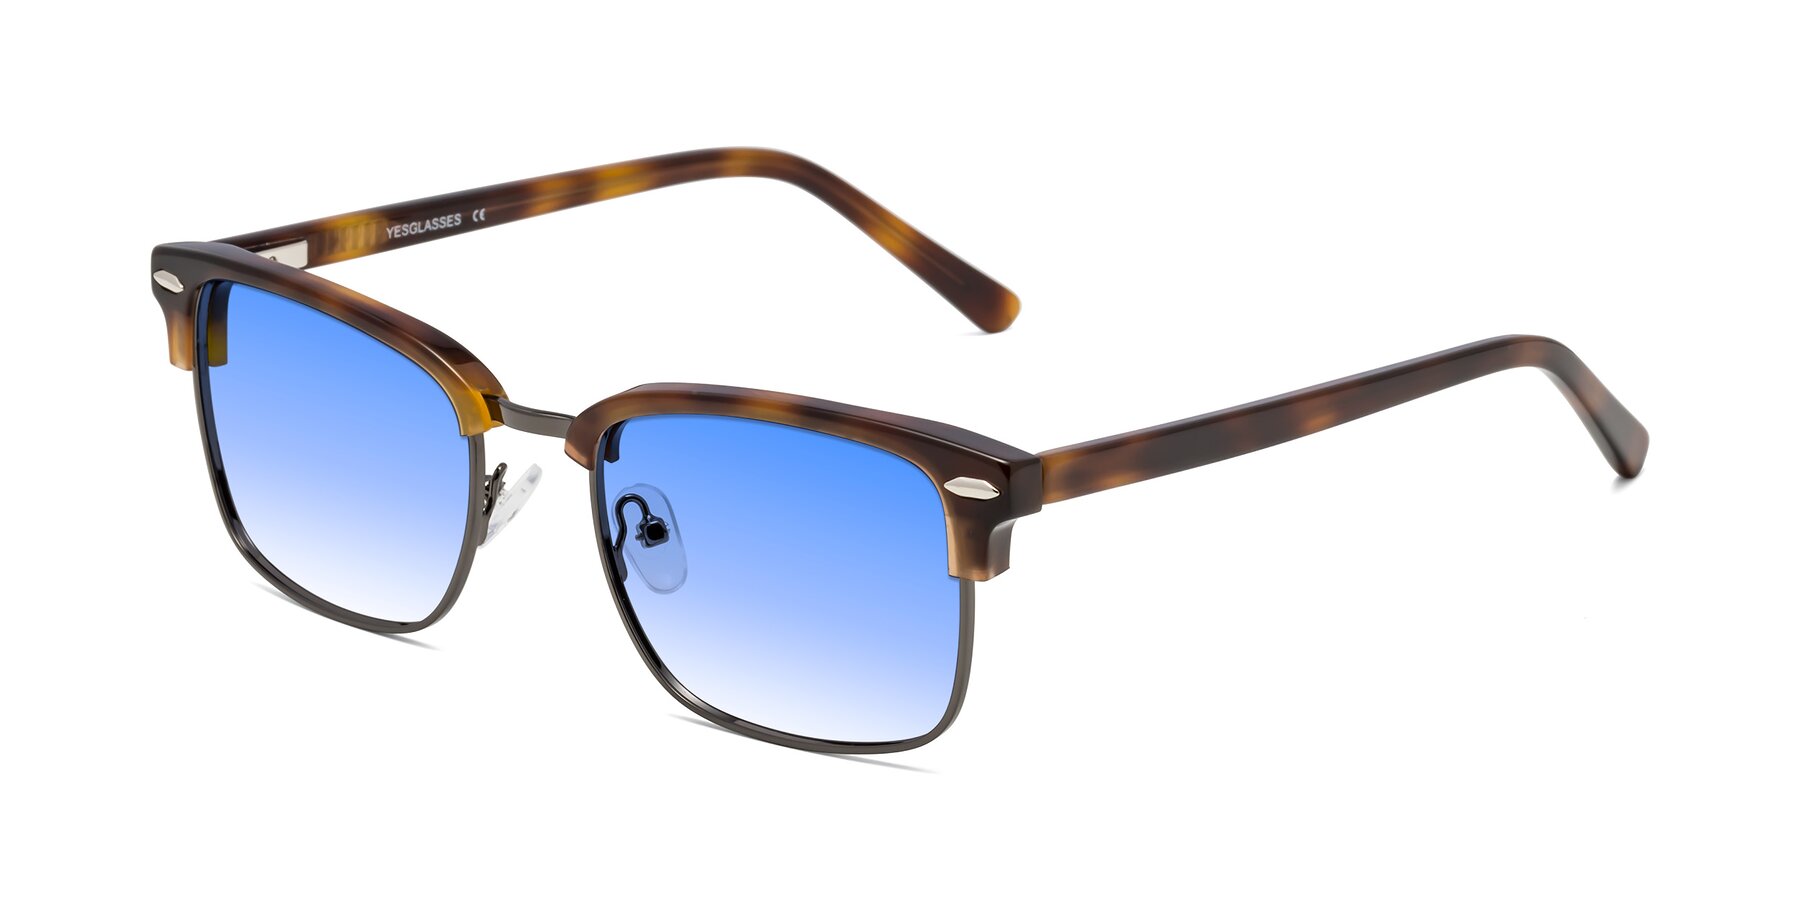 Angle of 17464 in Tortoise/ Gunmetal with Blue Gradient Lenses